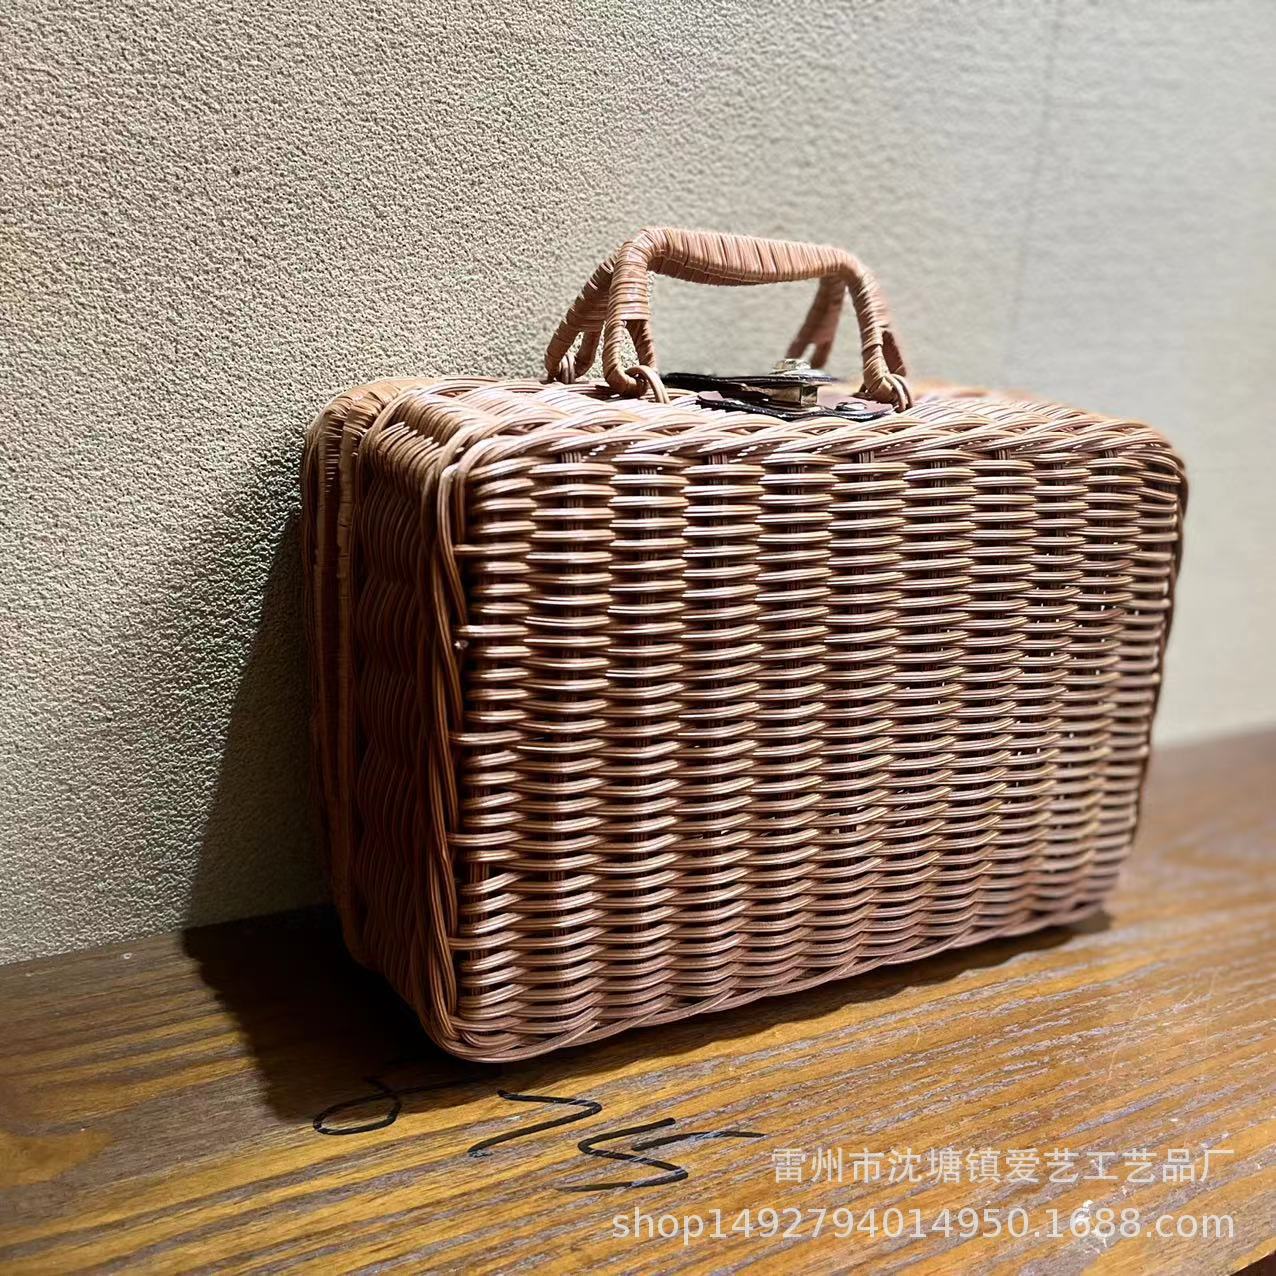 Factory New Wedding Gift with Lid Storage Box Imitation Rattan with Lid Domestic Trade Storage Basket Suburban Gathering